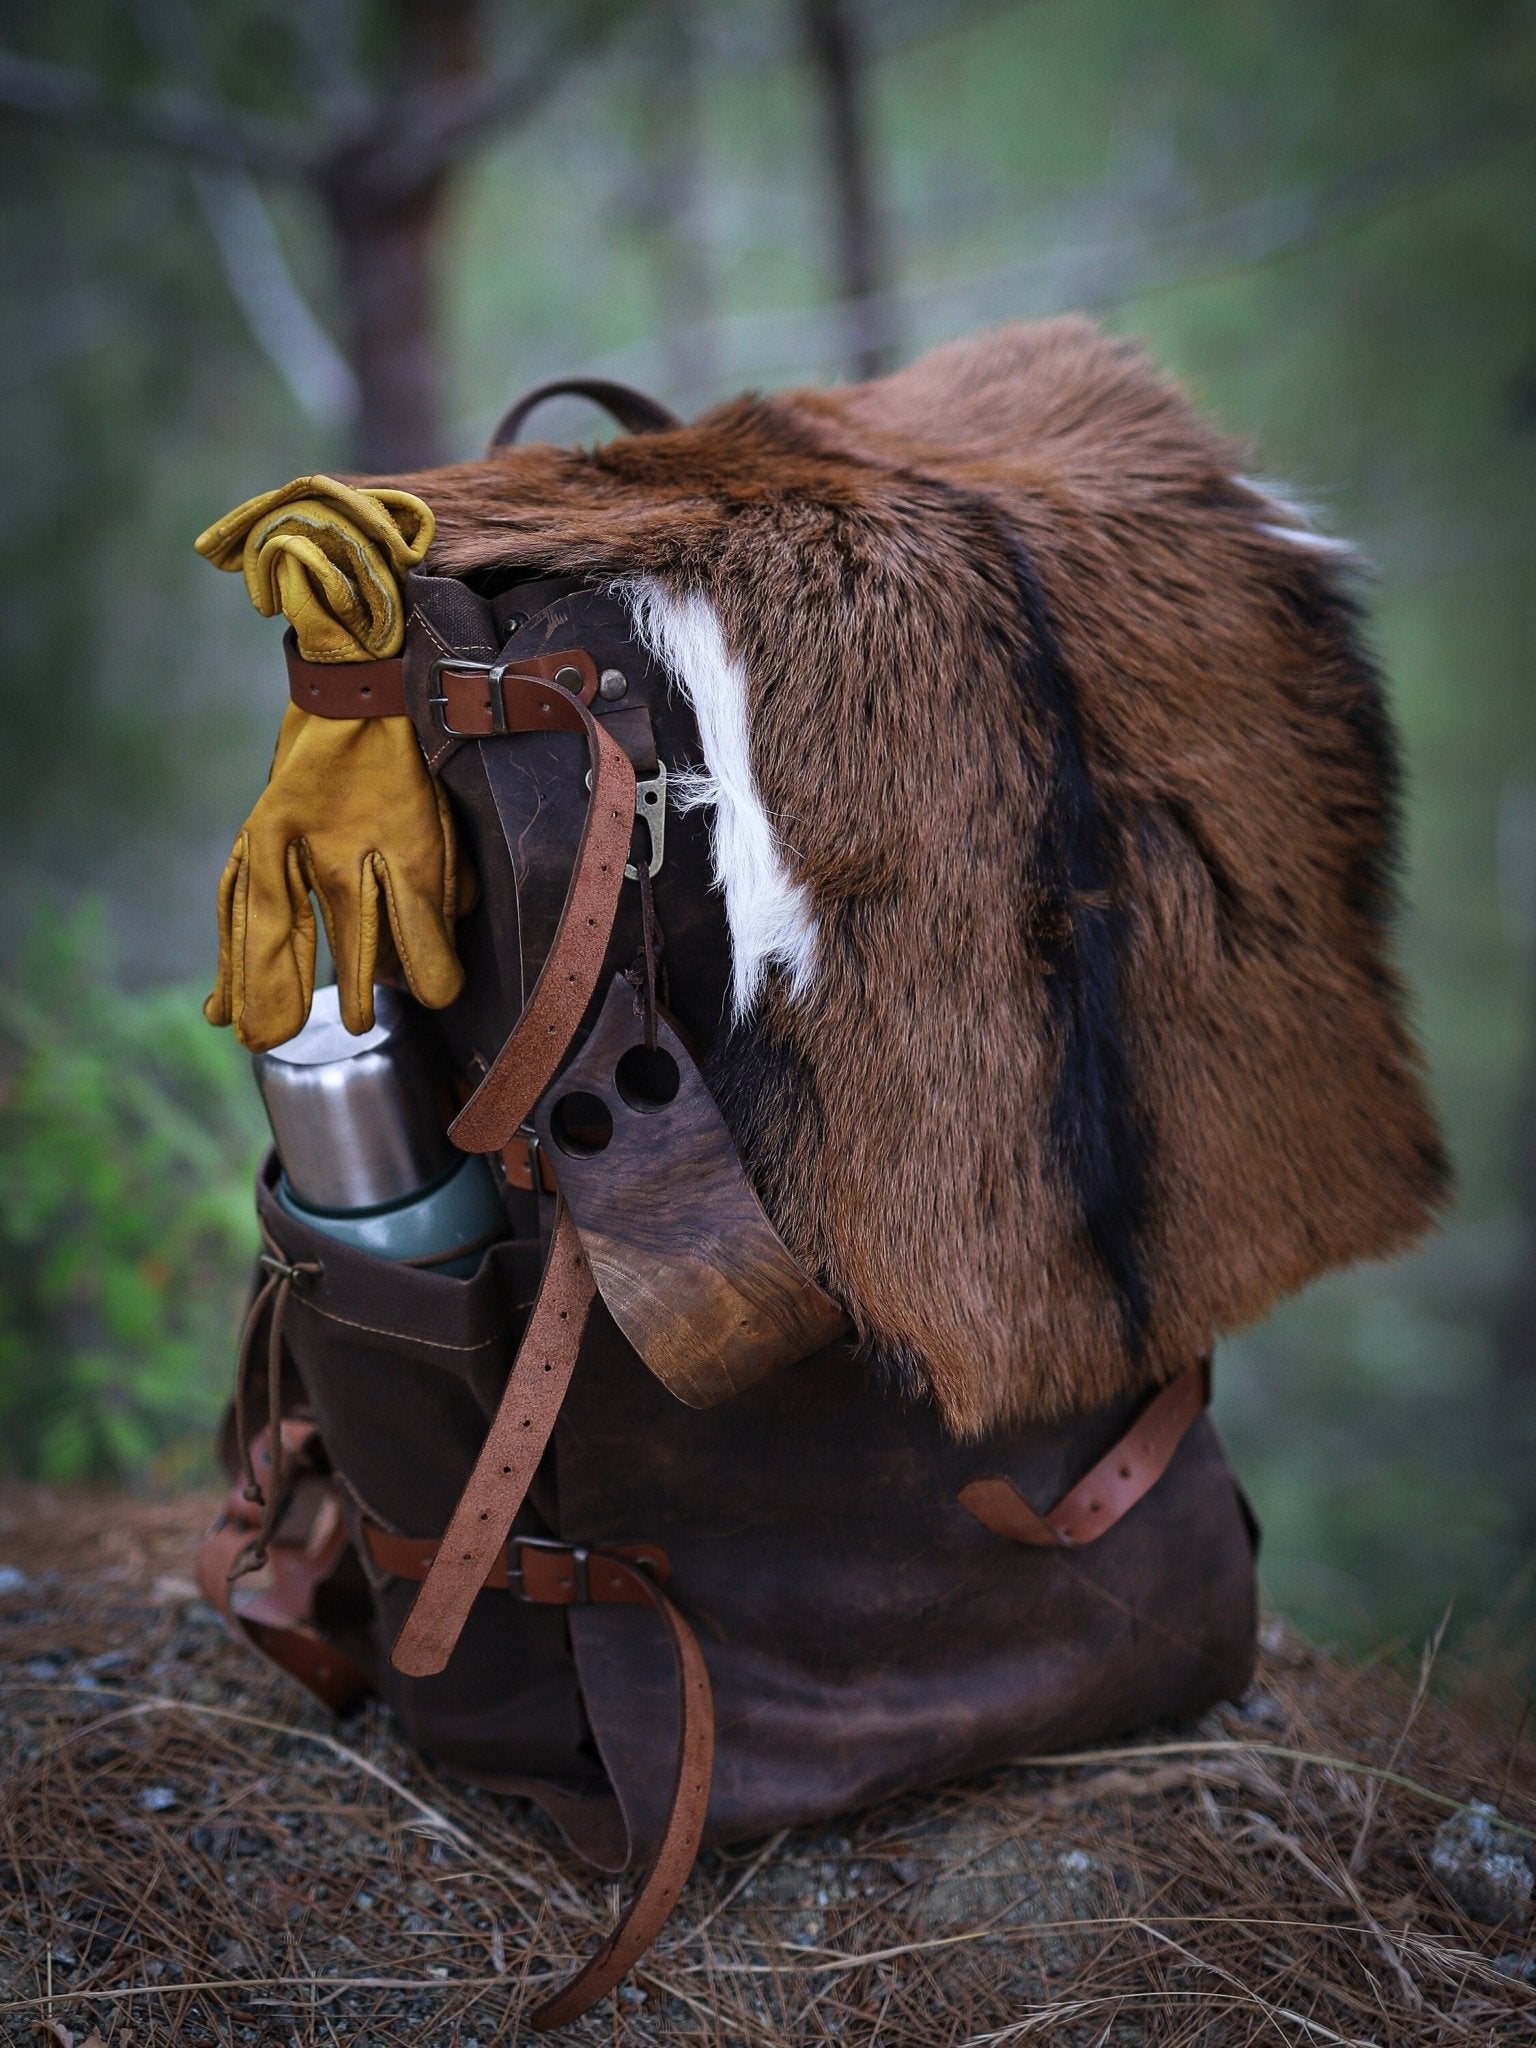 Goat Fur , Canvas and Leather Bag | Bushcraft | Camping | Outdoor | Hiking | Handmade Backpack l  | 30,40,50 Litres option bushcraft - camping - hiking backpack 99percenthandmade Brown 30 With Fur